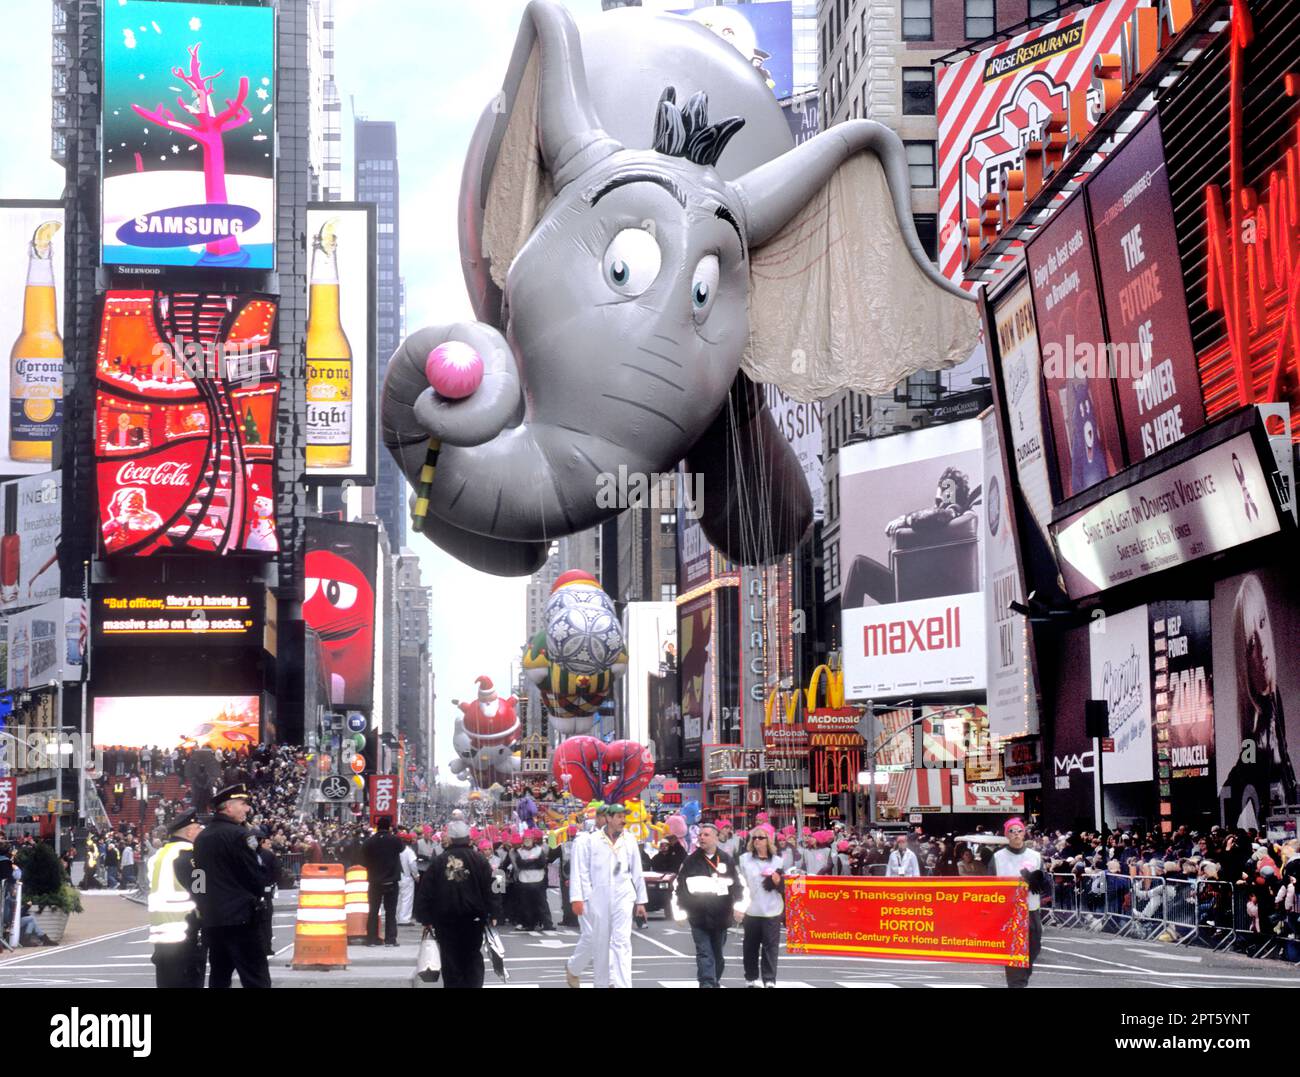 Macy's Thanksgiving Day Parade New York City Horton the Elephant balloon. Crowds on the street. Times Square and Broadway USA. American tradition Stock Photo